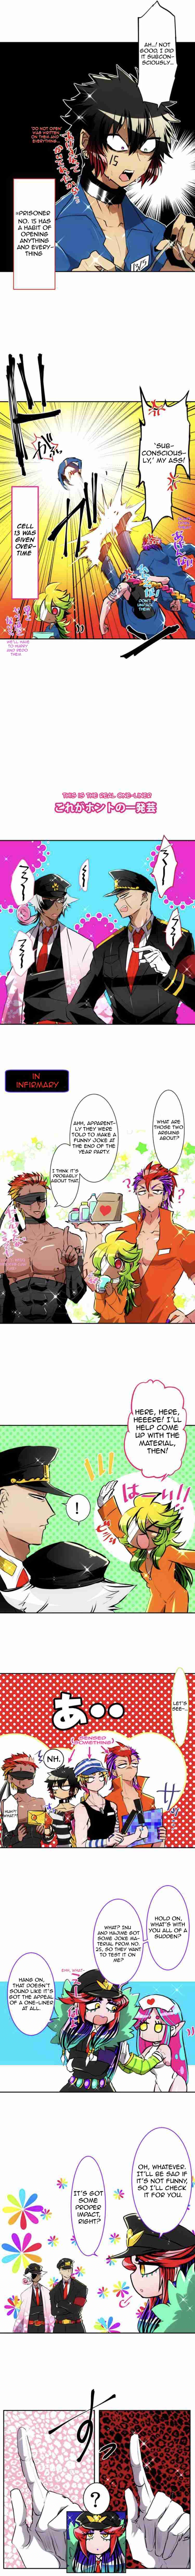 Nanbaka Ch. 153 The Times When We Slipped Up+α